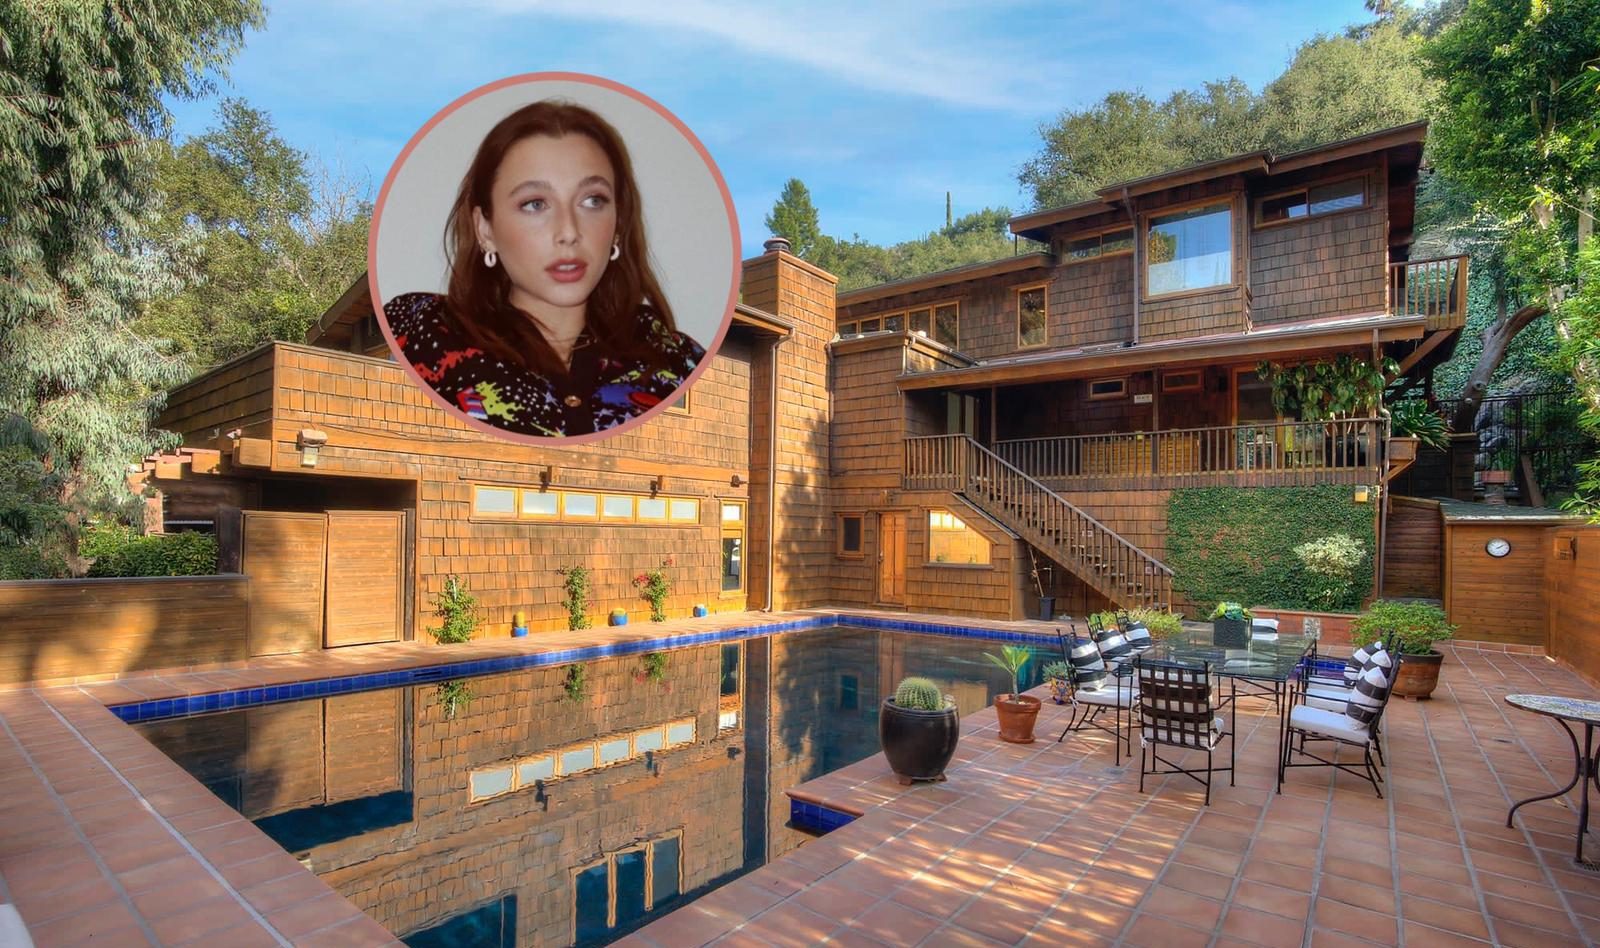 r Emma Chamberlain Sells West Hollywood Starter Home for